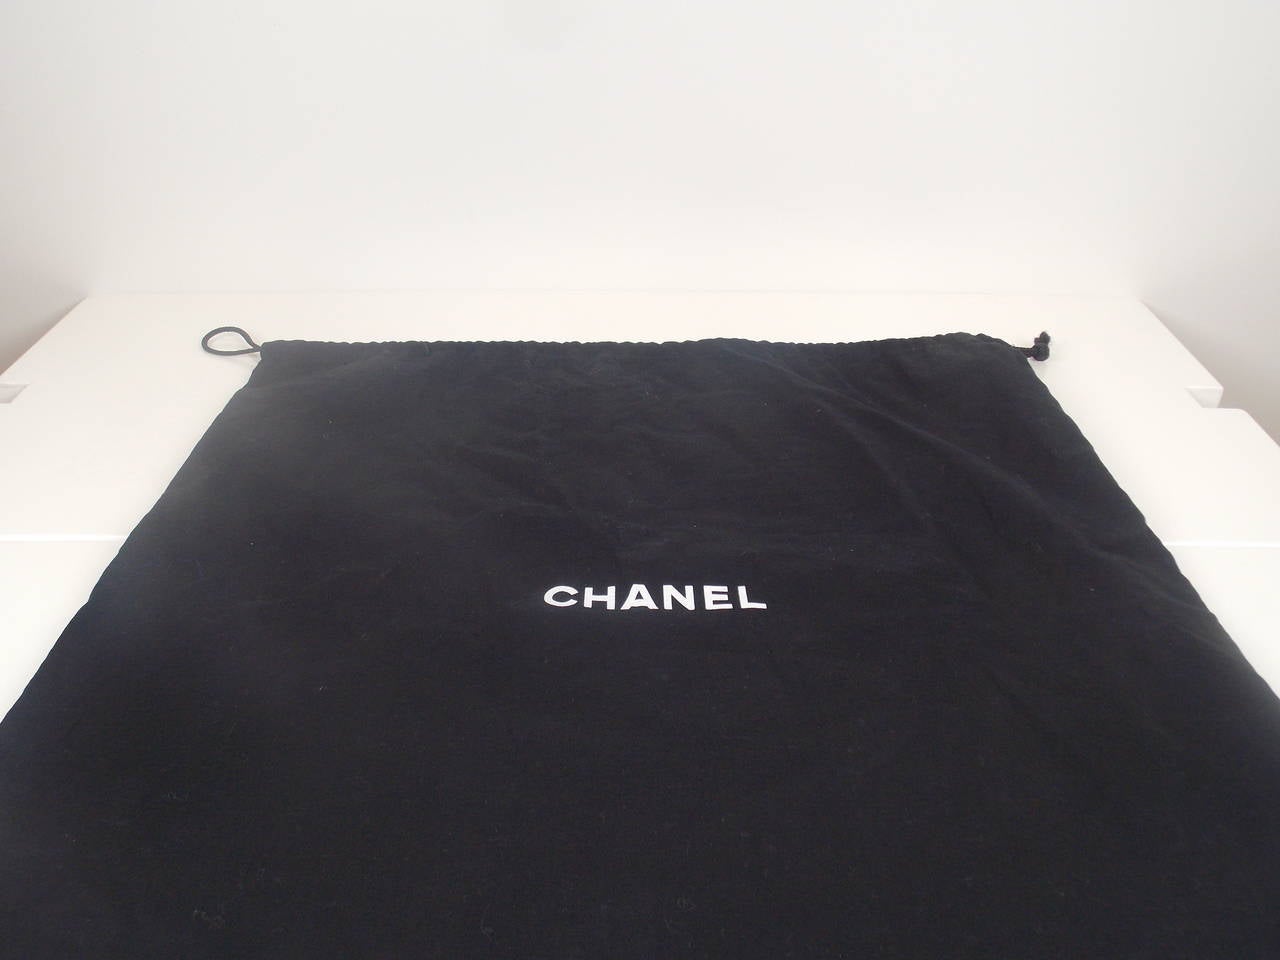 Chanel Patent Leather Clutch with Chain Strap 2